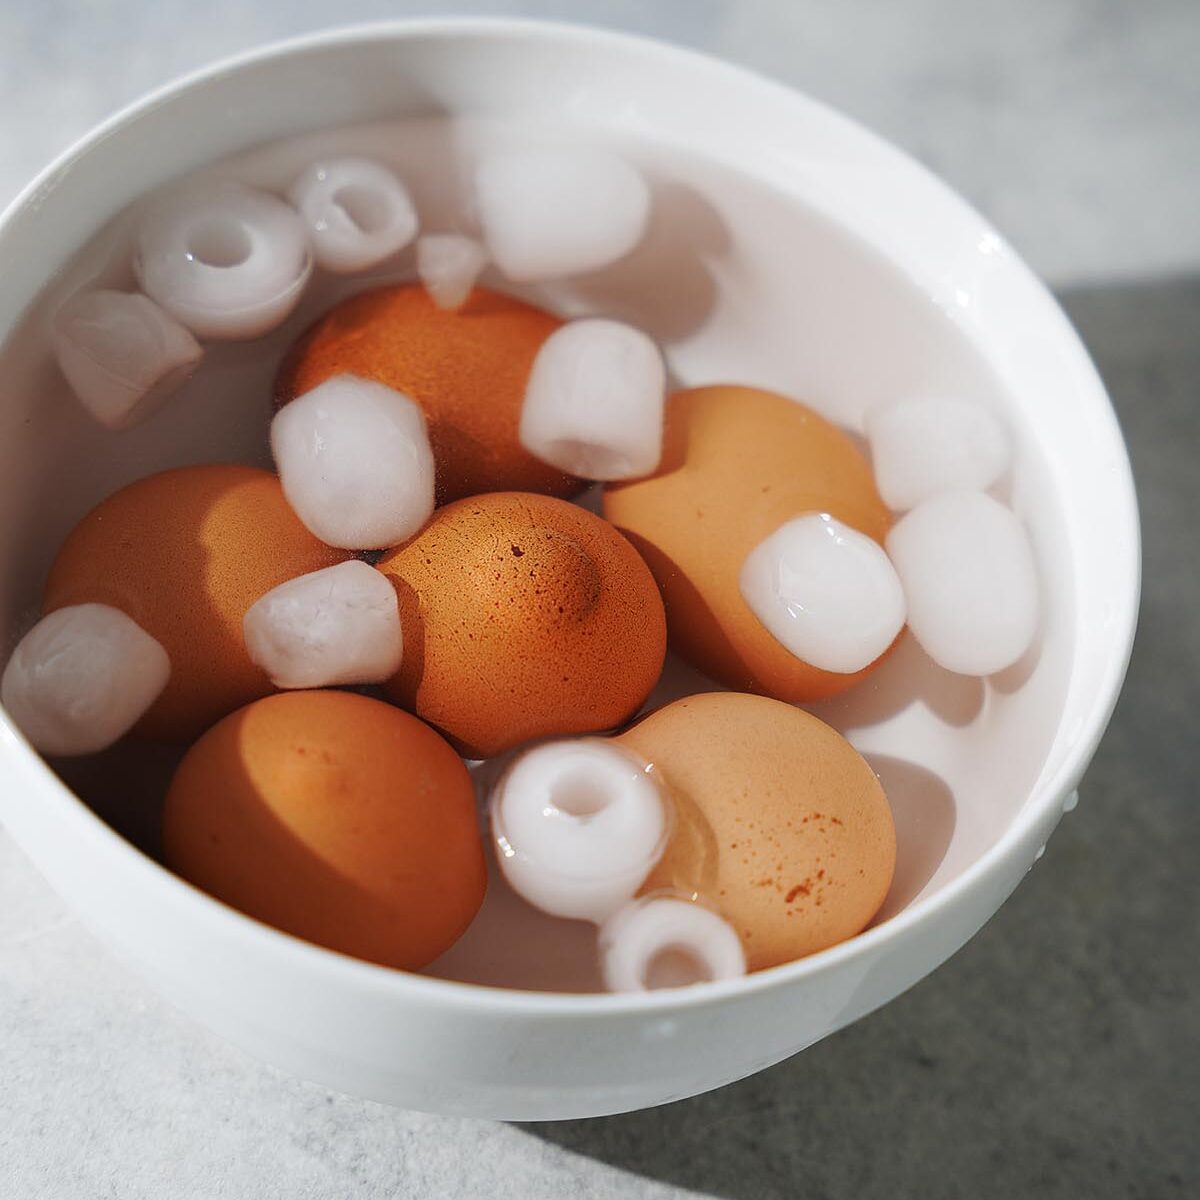 The cooked eggs placed inside a bowl with water and ice.